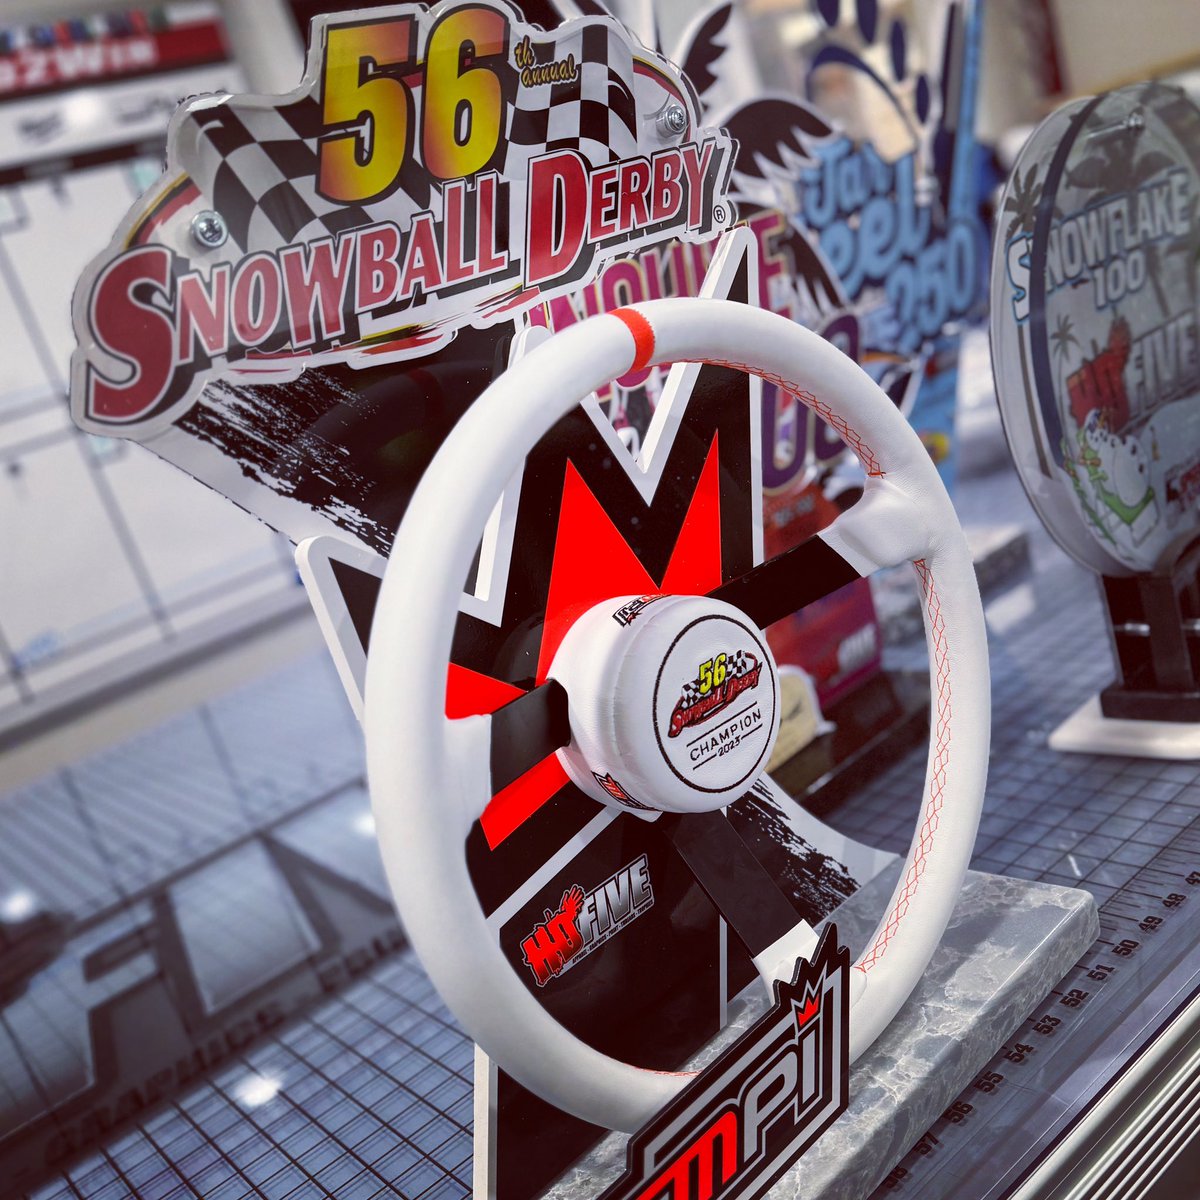 The @MPI_INNOVATIONS / @HorvathDesign Snowball Derby Champions trophy is ready to head south. No @FedEx missed delivery with this one, as we will be hand delivering to Victory Lane. Who’s your pick to win?Watch on @racingamerica_ or live @5flagsspeedway. #Designed2Win #iSpyMPi